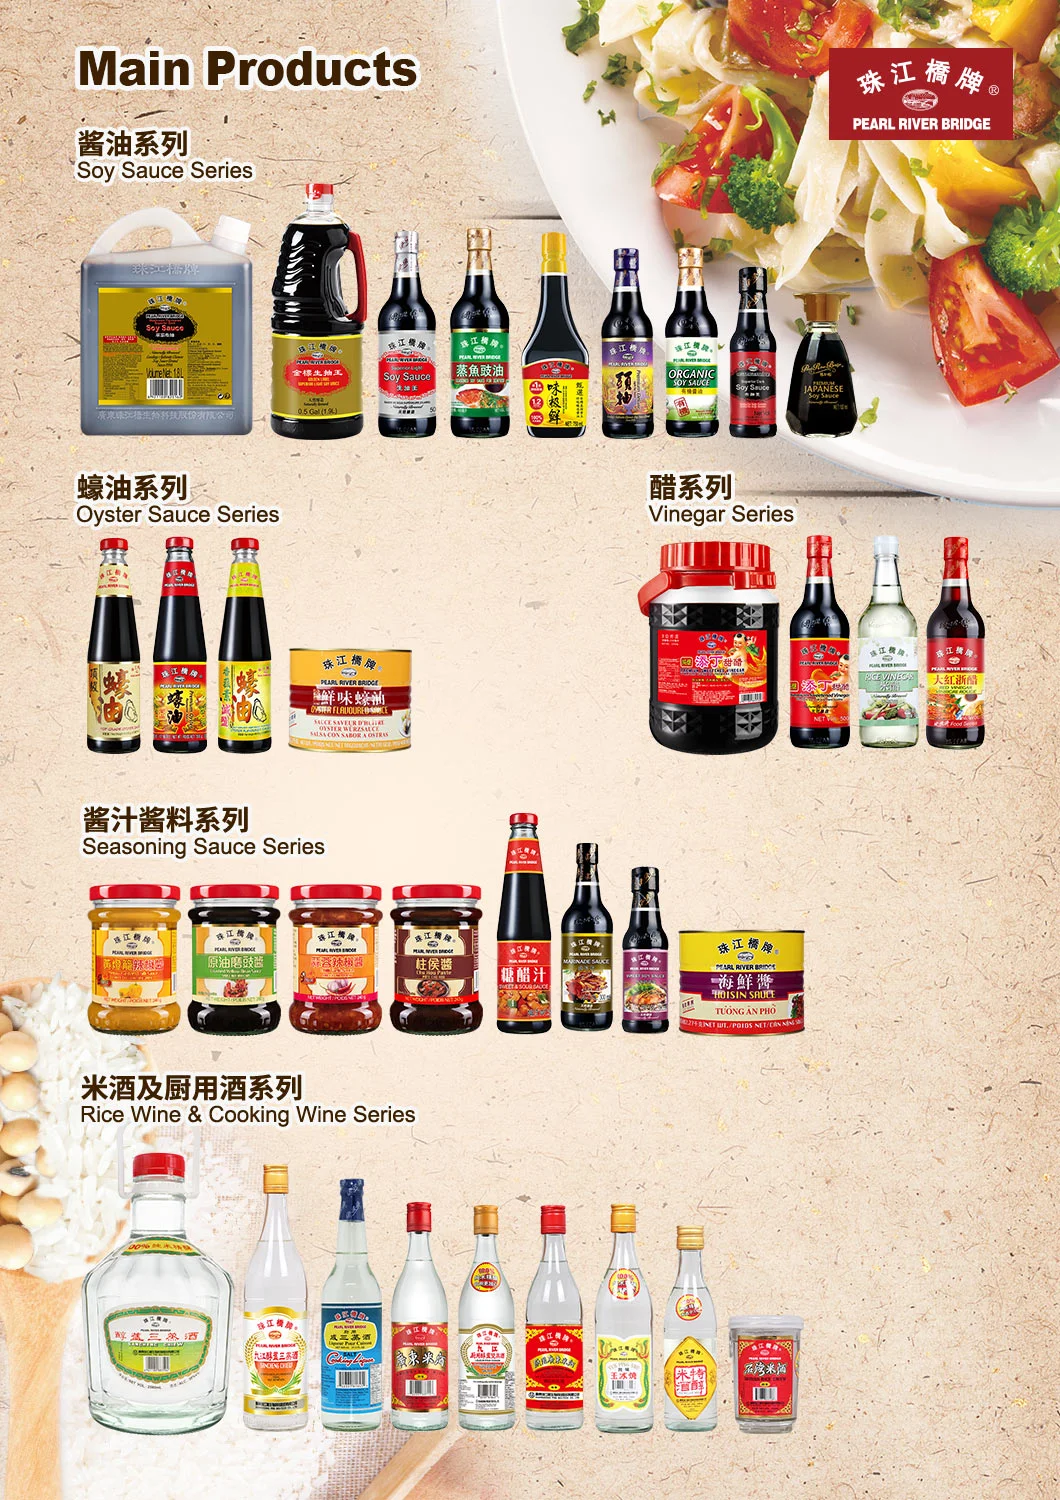 Pearl River Bridge Brand Premium Lite Soy Sauce Reduced Salt 150ml for Home/Restaurant/Supermarket with Low Price